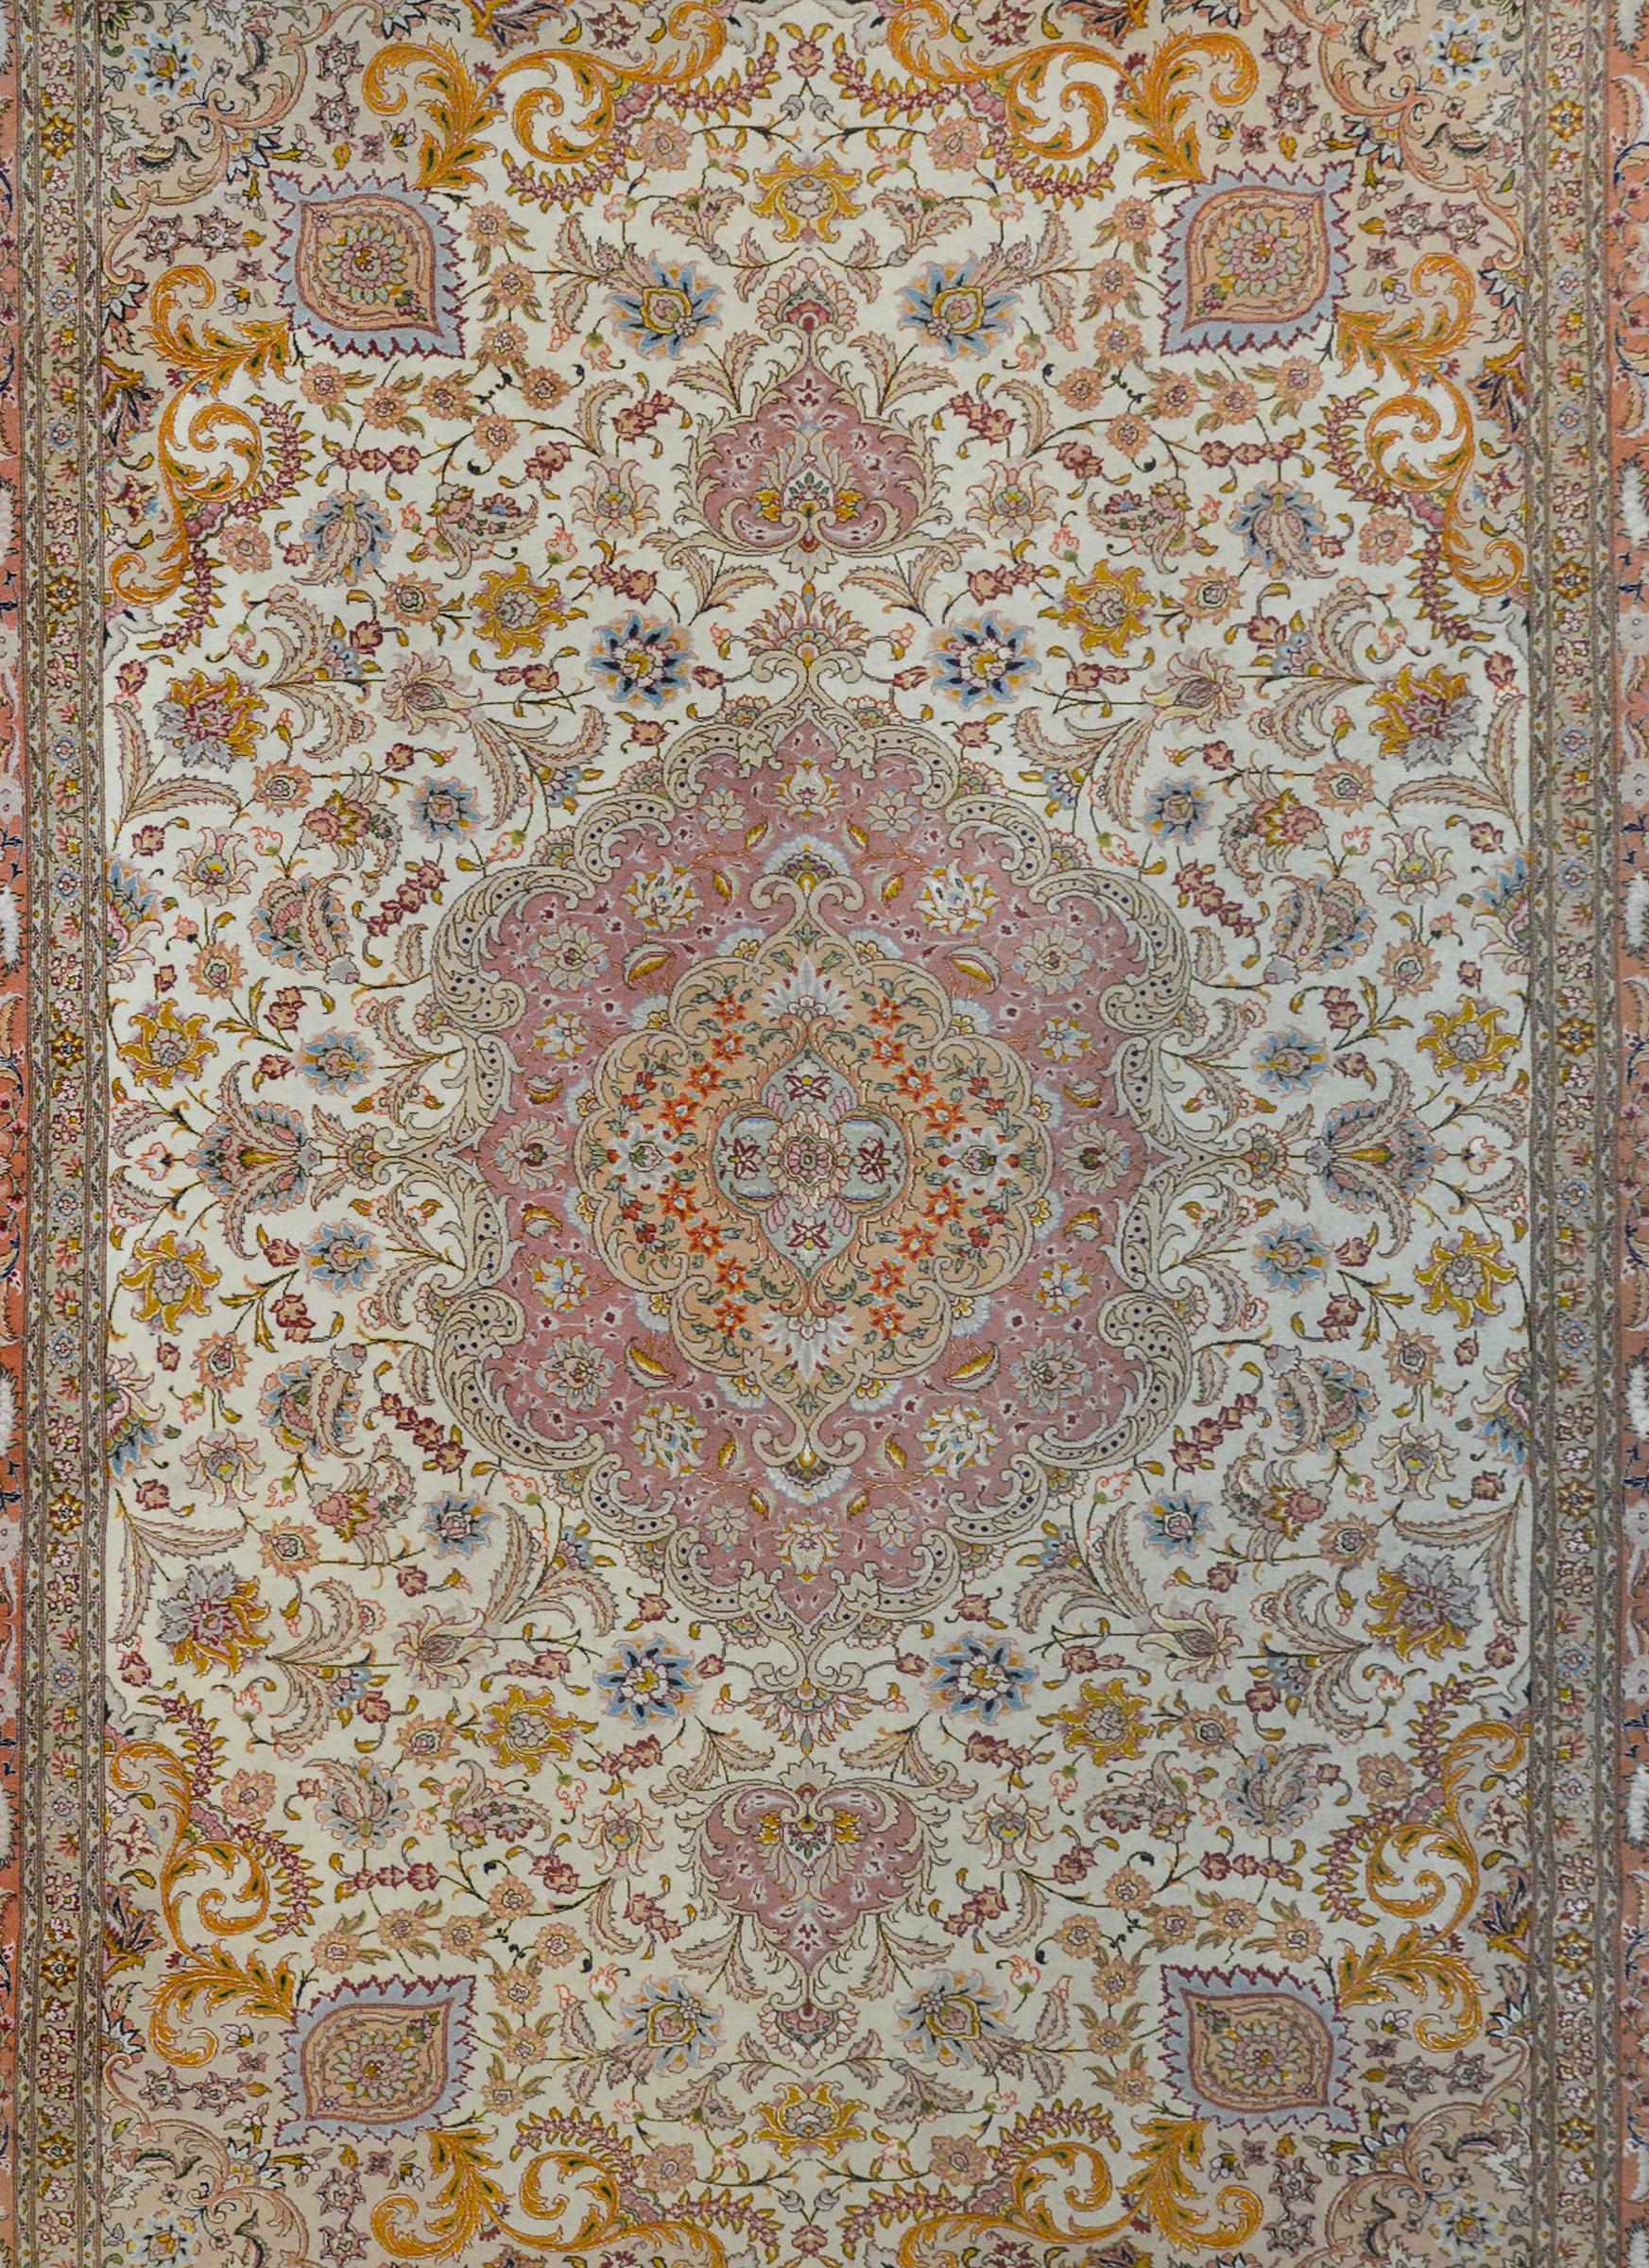 A wonderful vintage Persian silk and wool Tabriz rug with a large central medallion woven in myriad flowers and vines on a lavender background, and living amidst another densely woven field of more flowers and scrolling vines, against a white